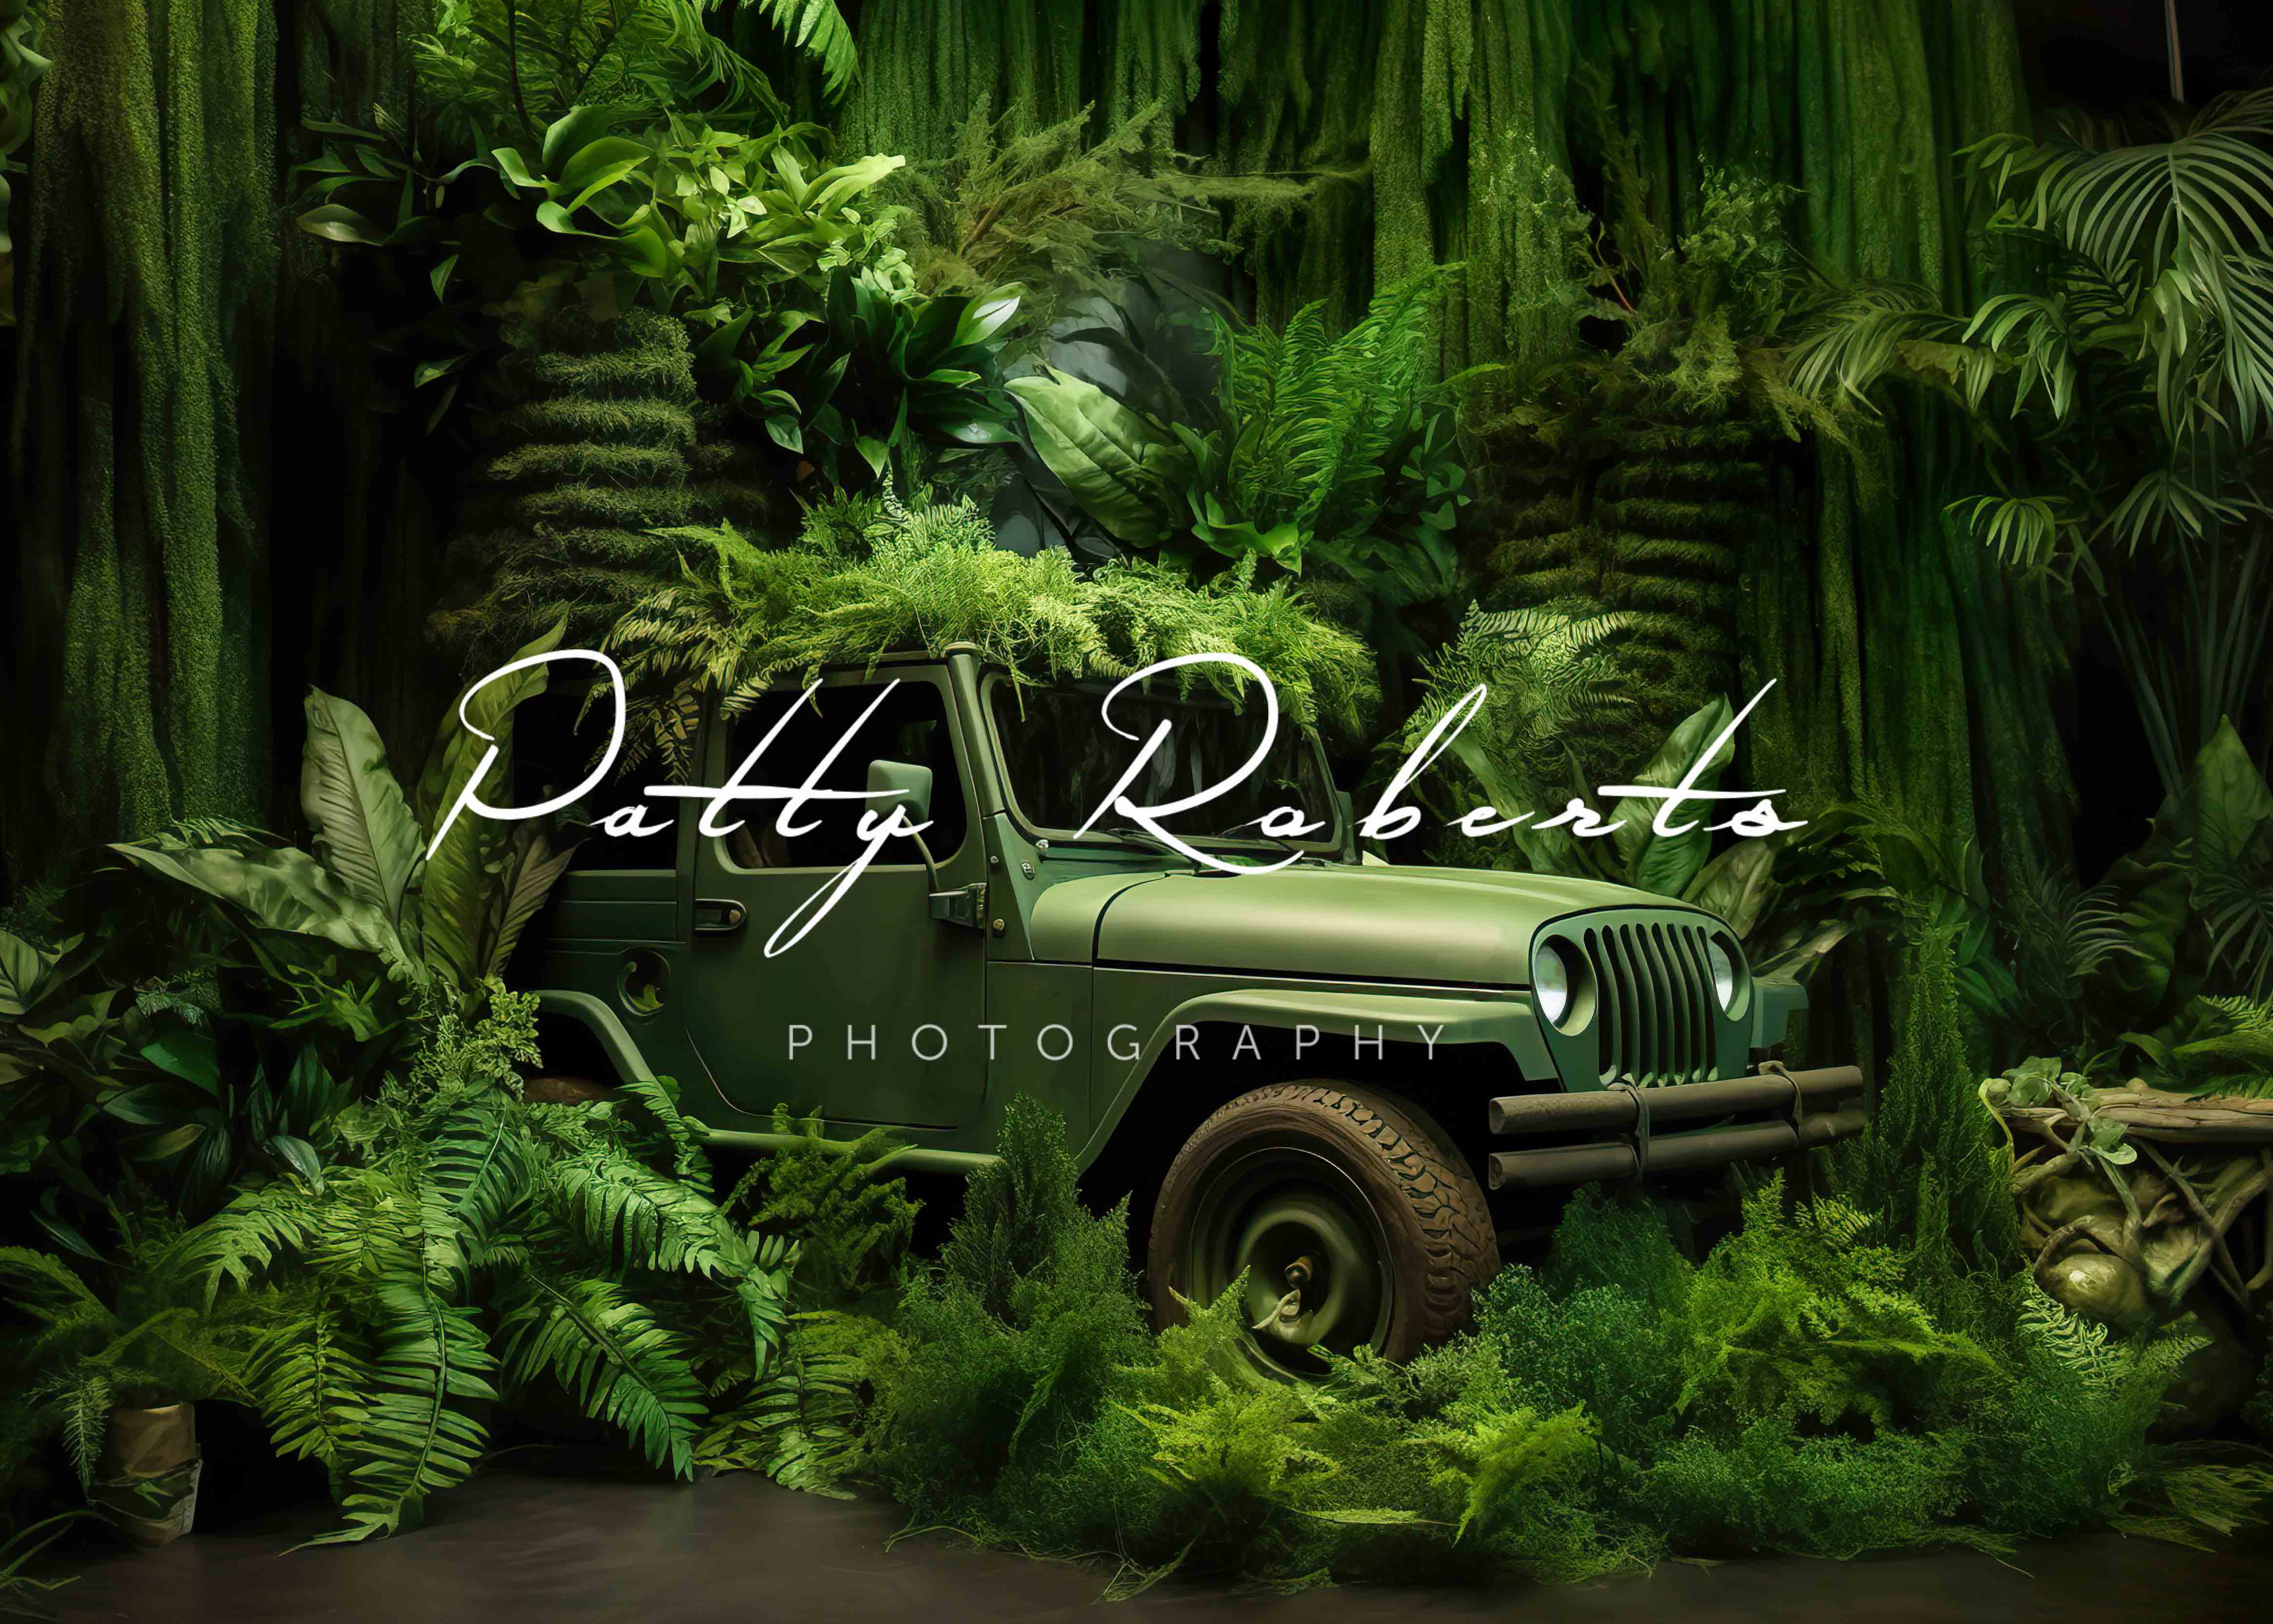 Kate Green Jeep in Jungle Backdrop Designed by Patty Roberts